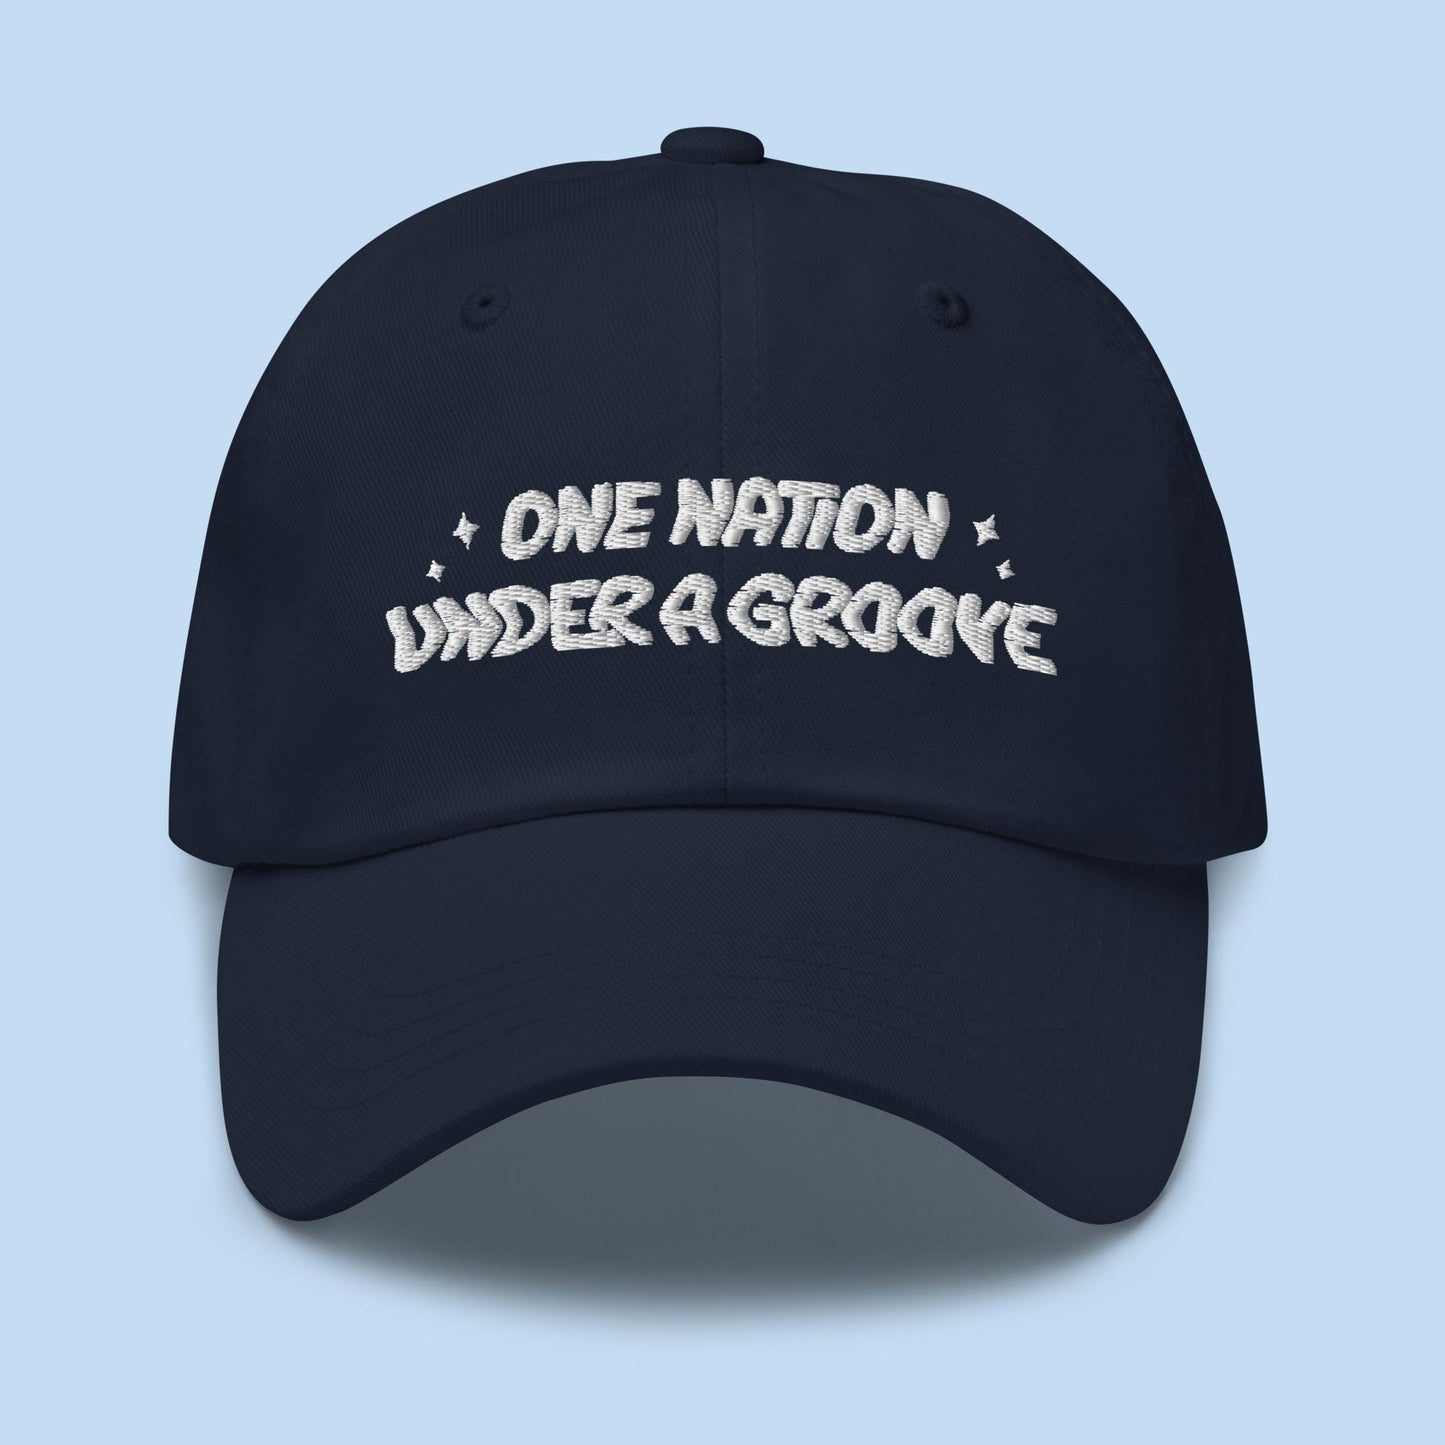 One Nation Under a Groove Dad Hat